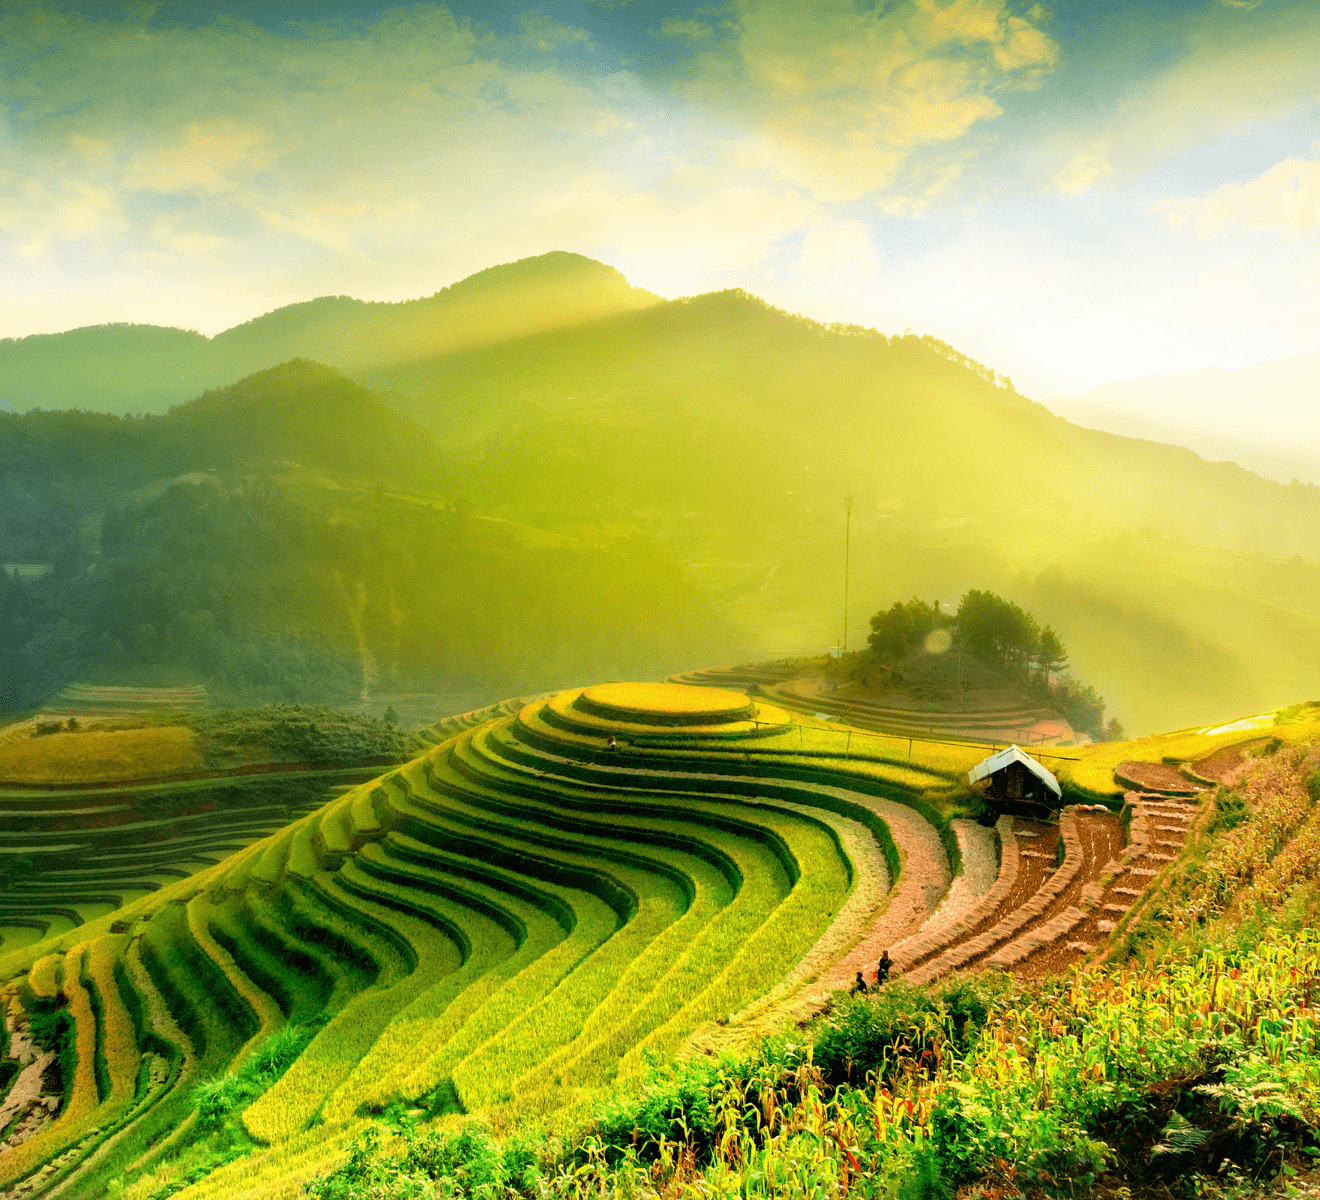 14 DAY VIETNAM DISCOVERY WITH SAPA